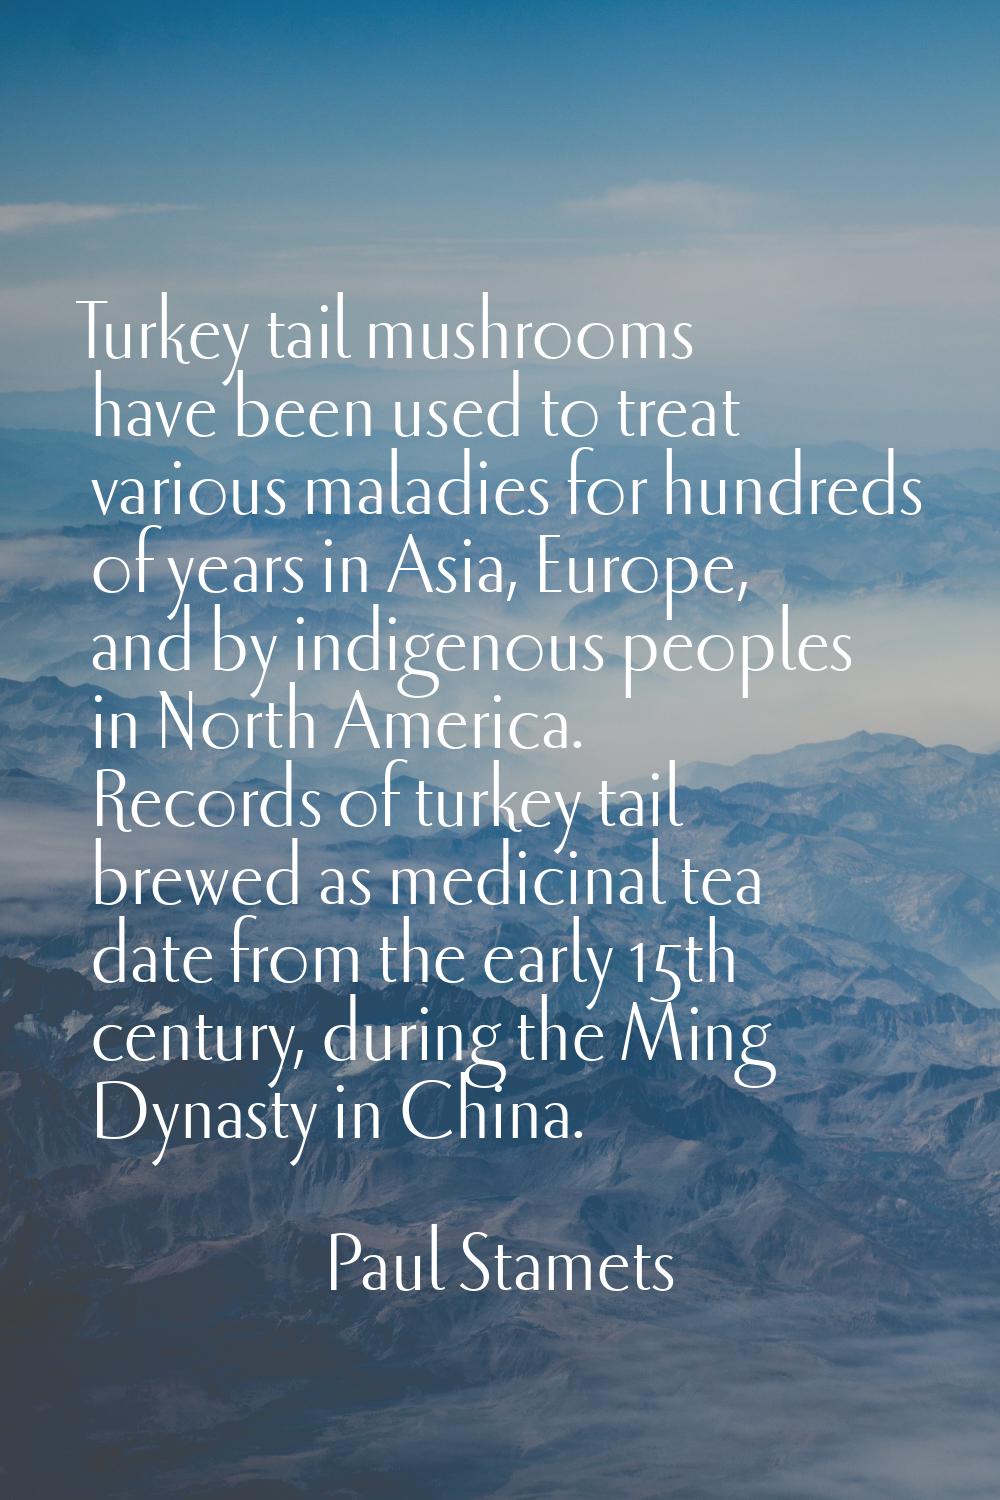 Turkey tail mushrooms have been used to treat various maladies for hundreds of years in Asia, Europ